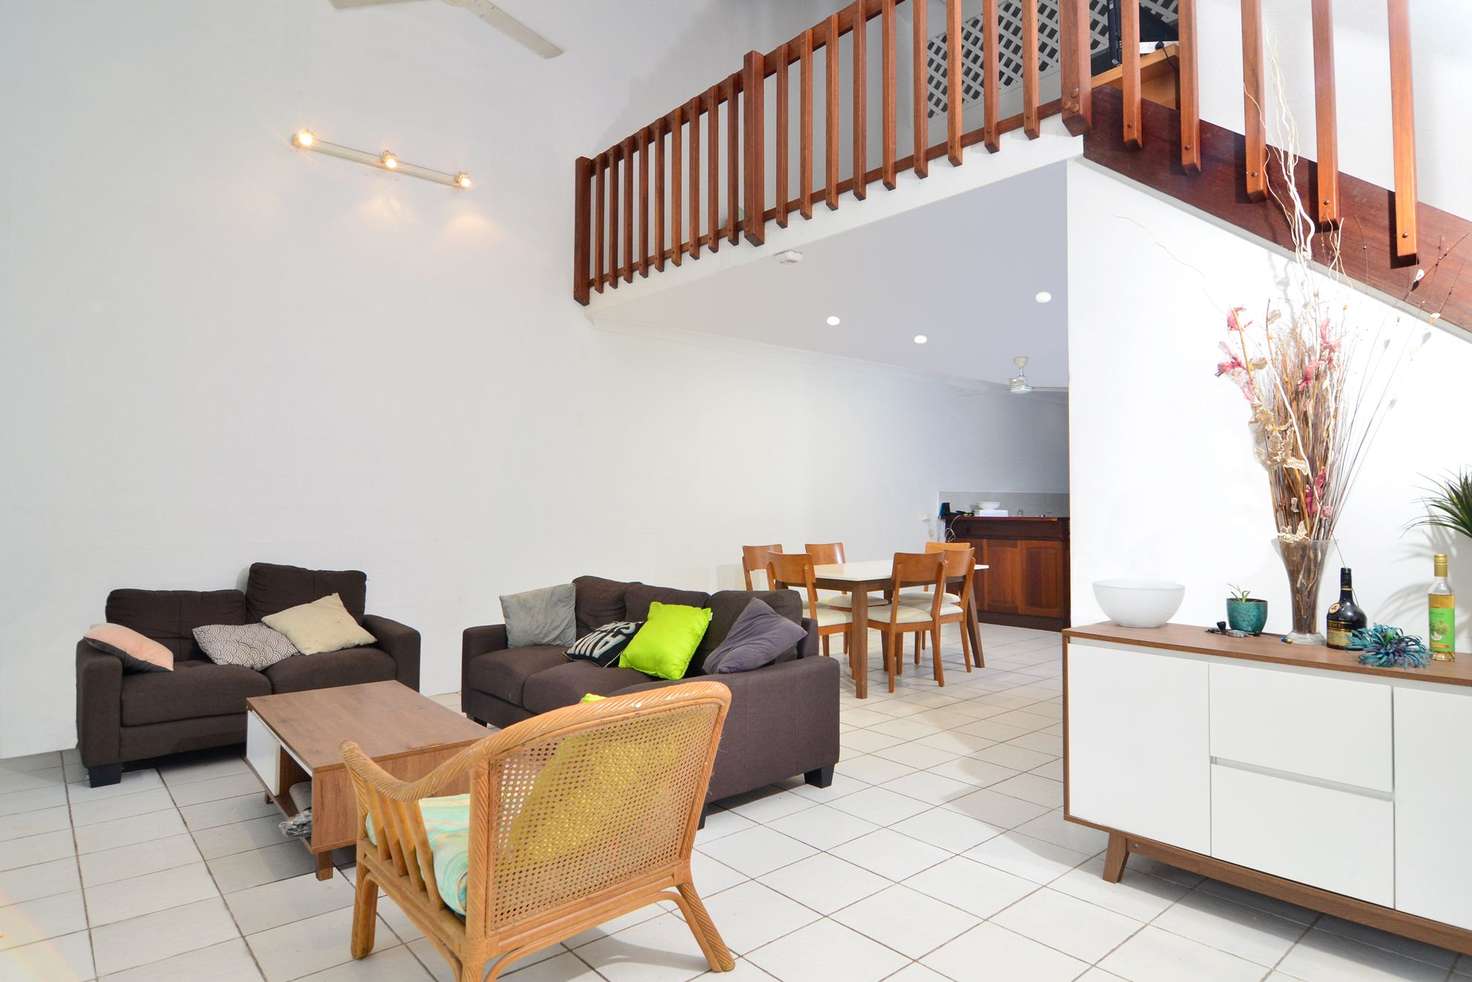 Main view of Homely apartment listing, 1/25 Langley Road, Port Douglas QLD 4877